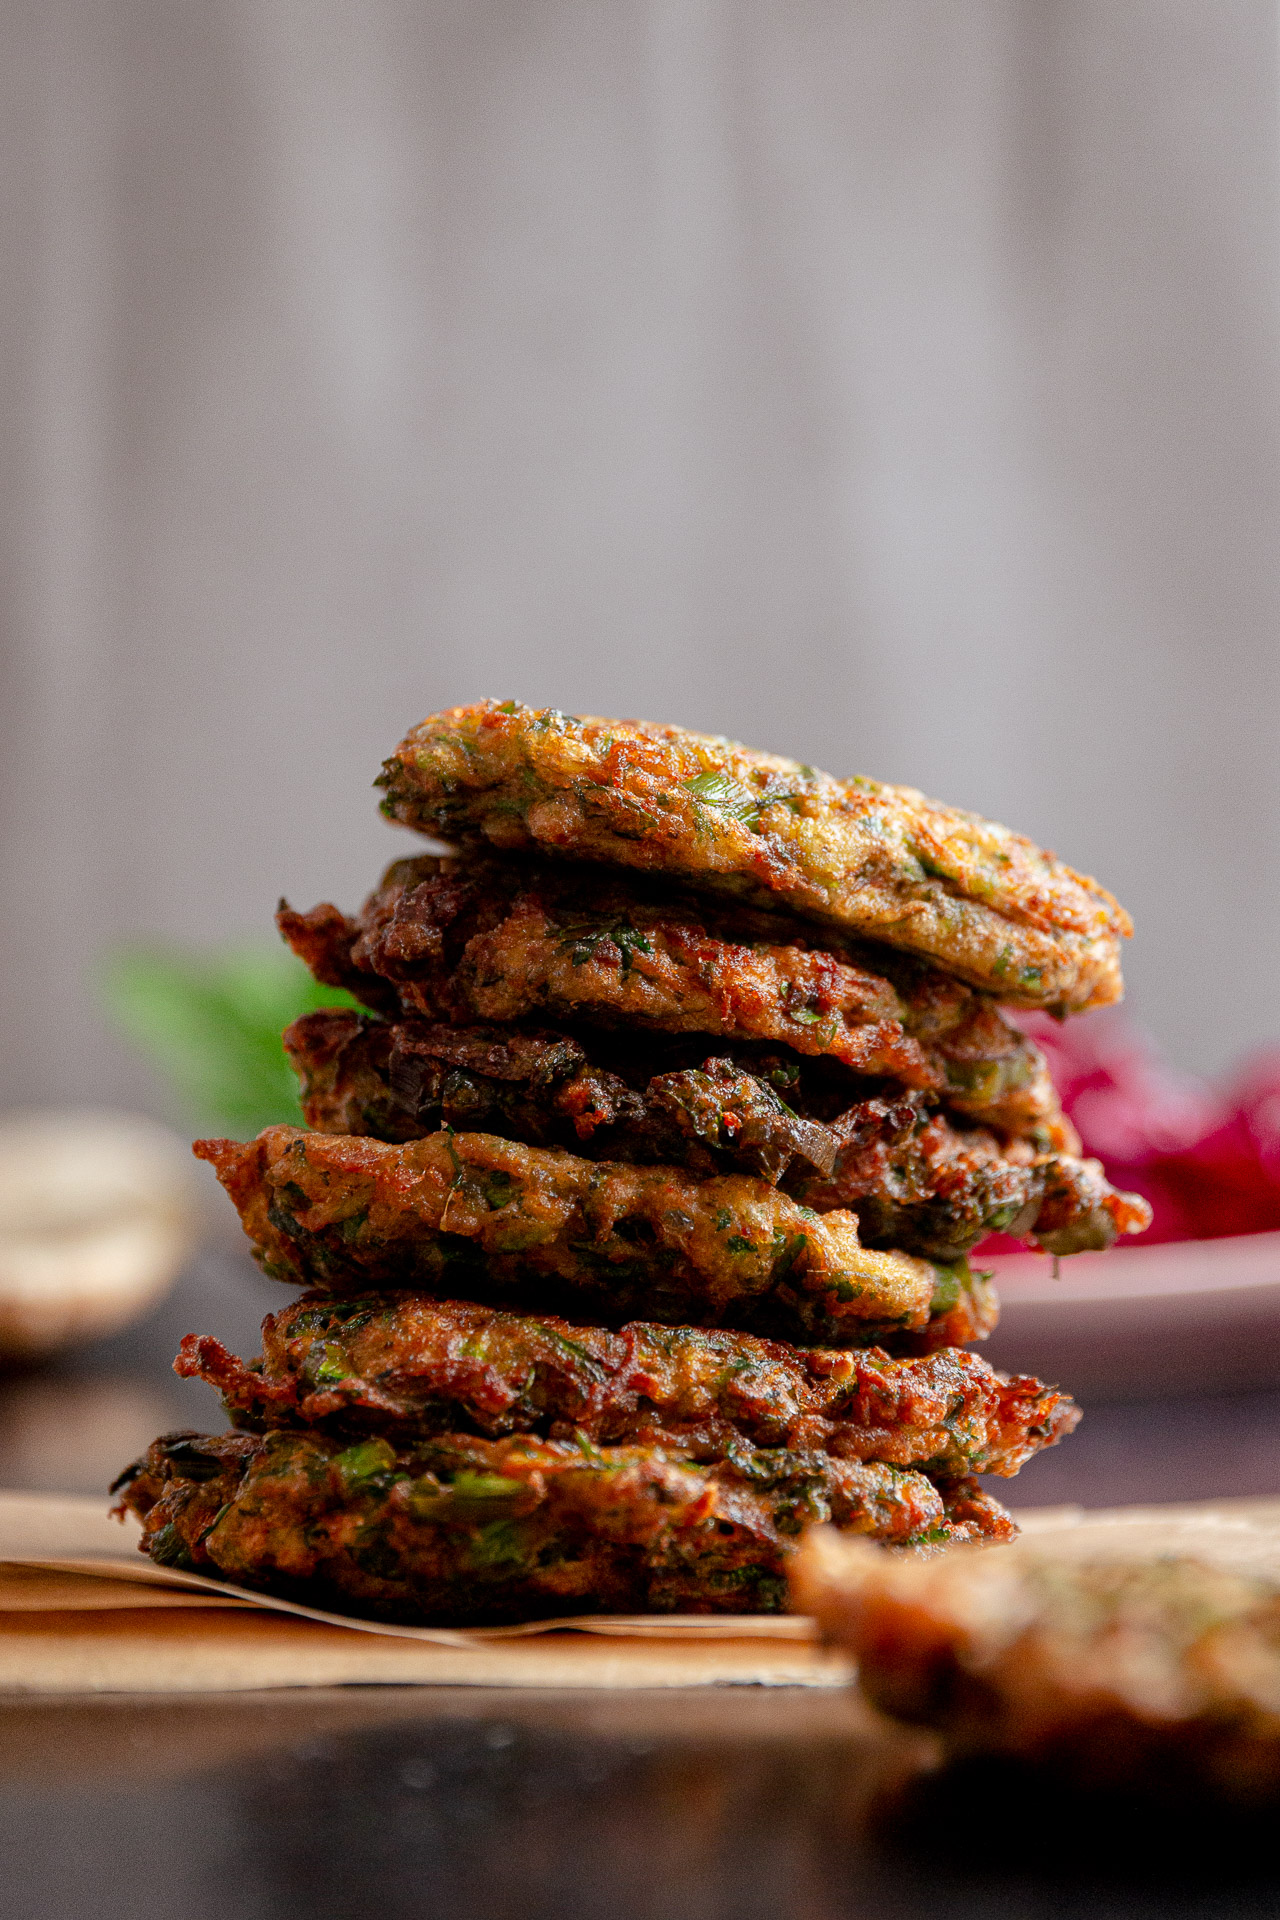 COURGETTE FRITTERS, CRISPY ON THE EDGES, SOFT IN THE MIDDLE